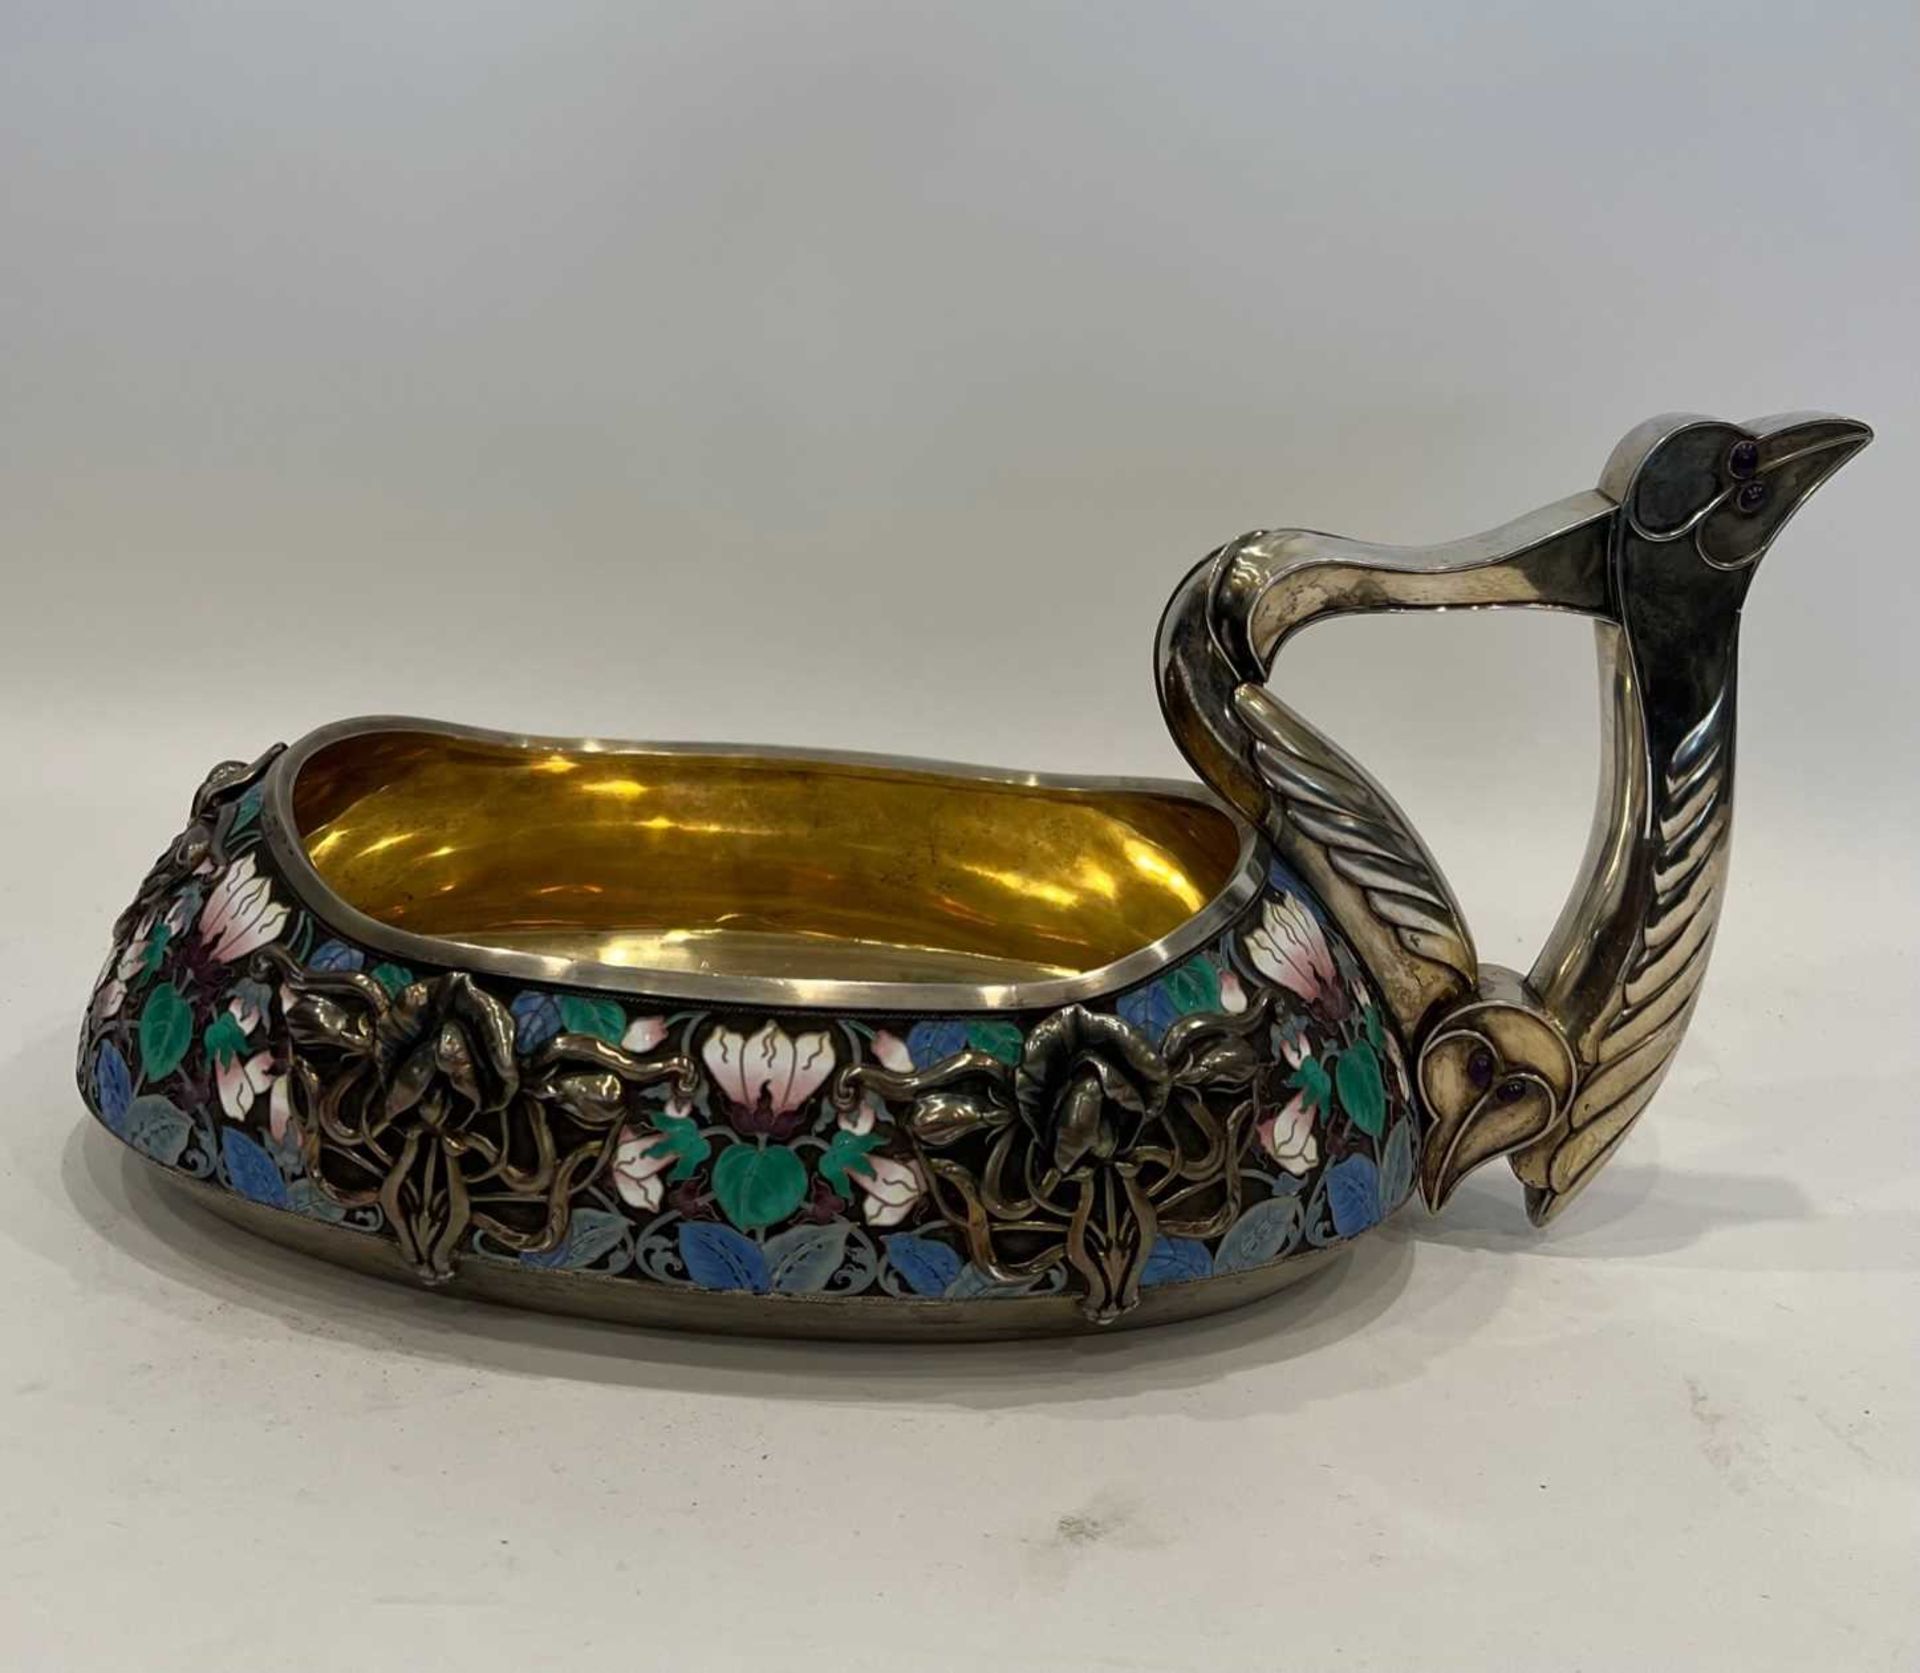 A MASSIVE EARLY 20TH CENTURY RUSSIAN SILVER AND ENAMEL KOVSH IN THE FORM OF A SWAN - Image 17 of 28